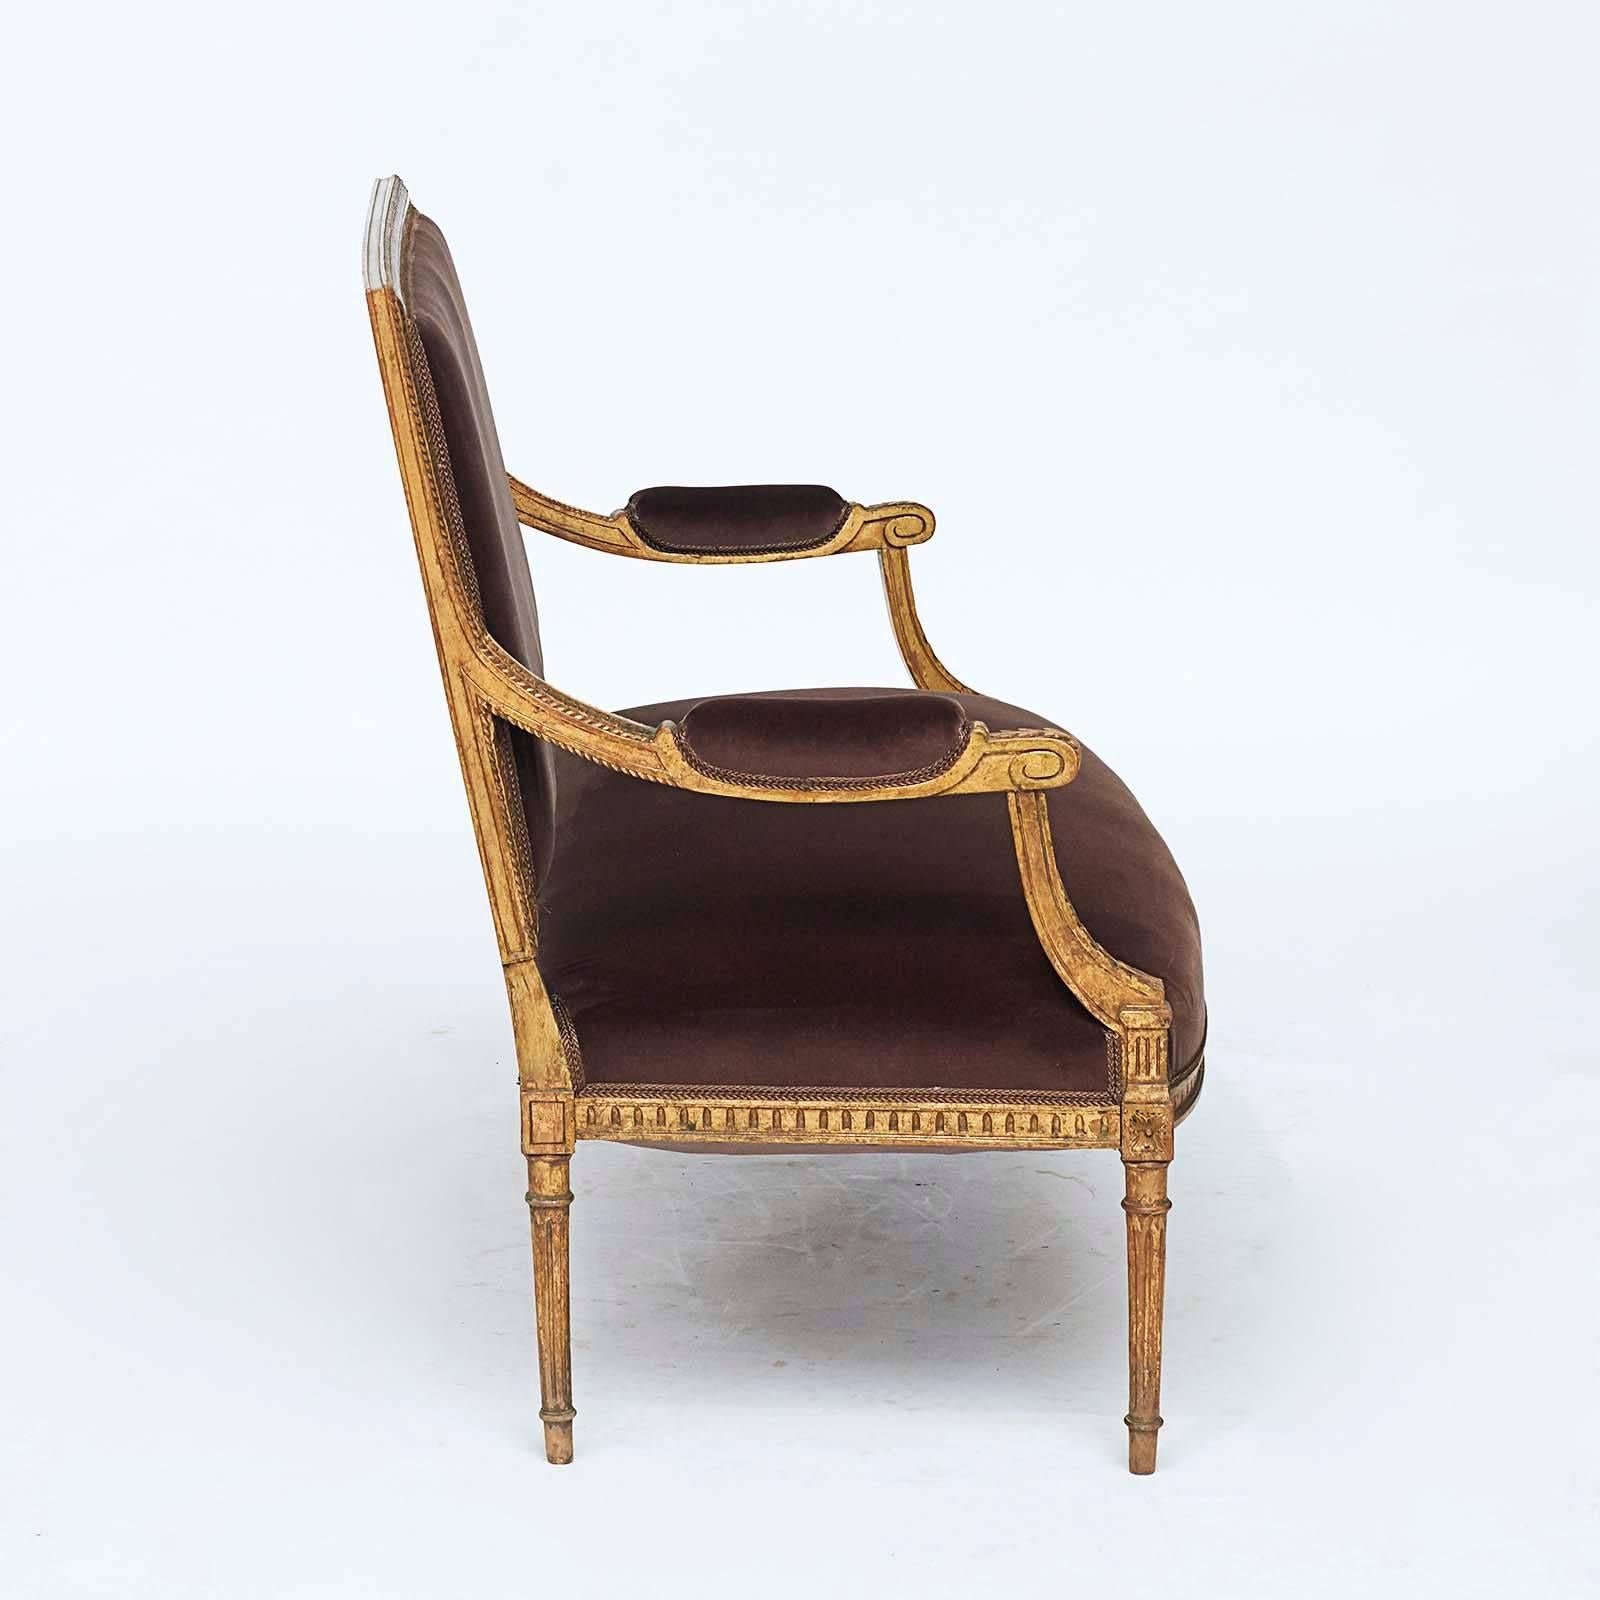 French Louis XVI Style Giltwood Settee, Late 19th Century